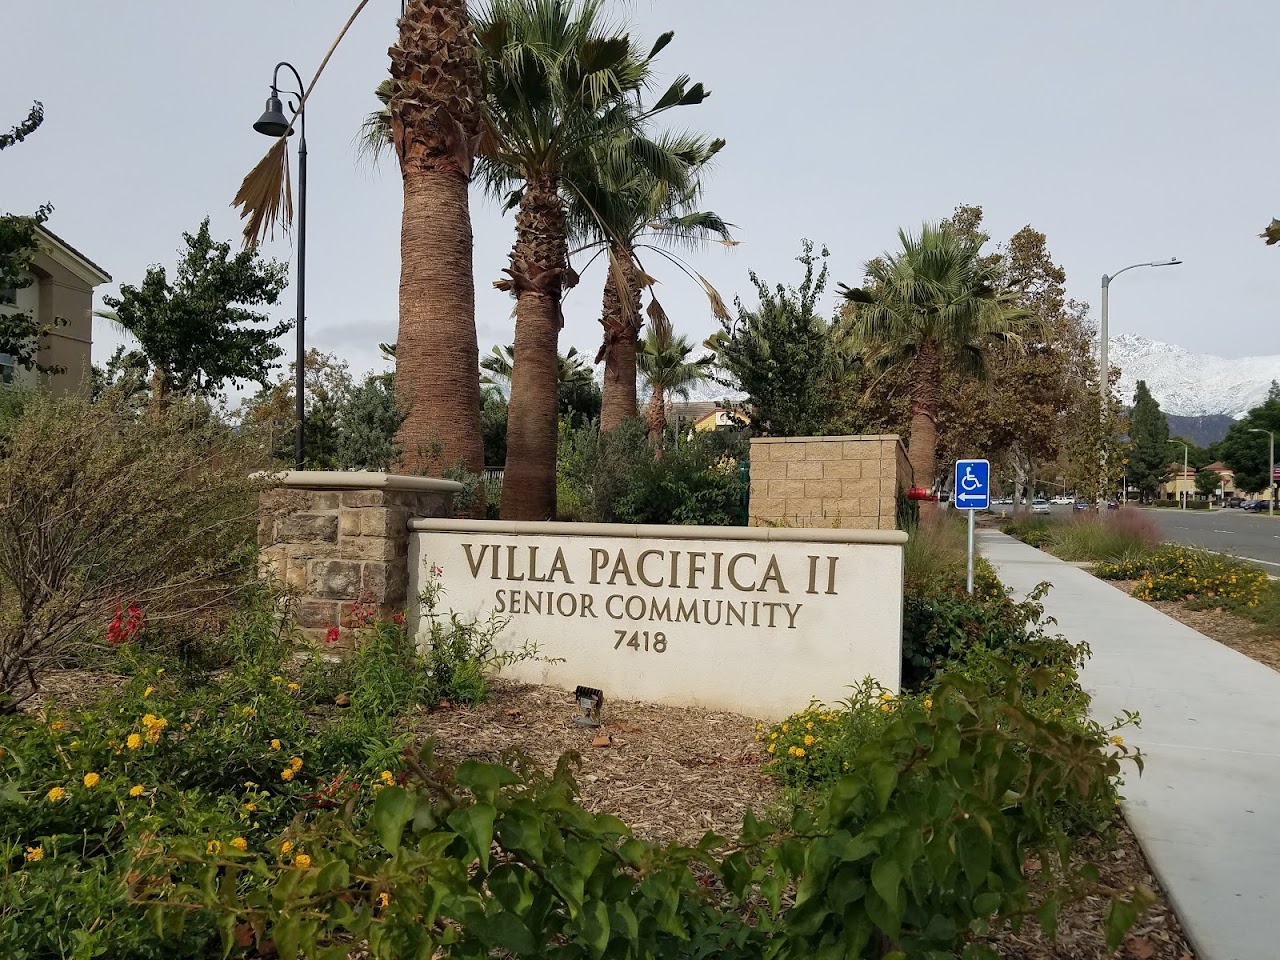 Photo of VILLA PACIFICA II. Affordable housing located at 7418 ARCHIBALD AVENUE RANCHO CUCAMONGA, CA 91730